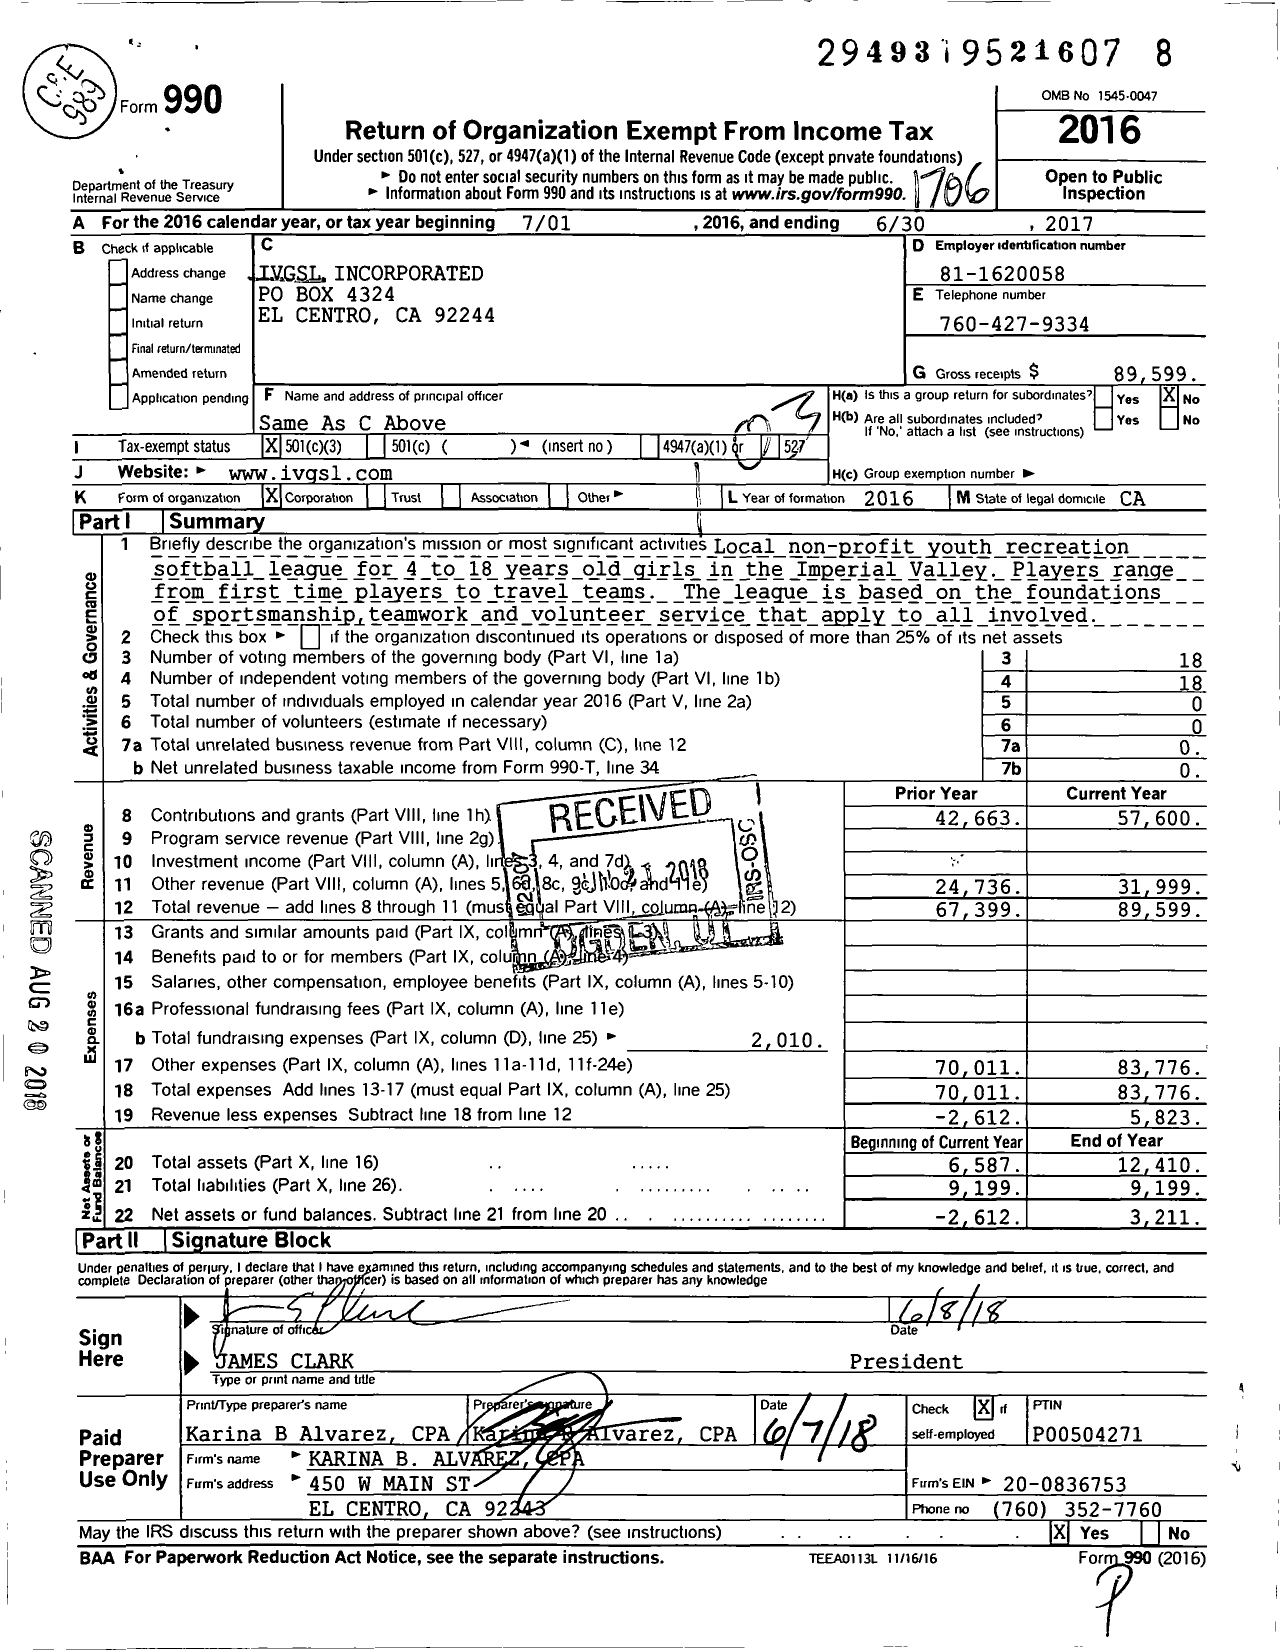 Image of first page of 2016 Form 990 for Ivgsl Incorporated